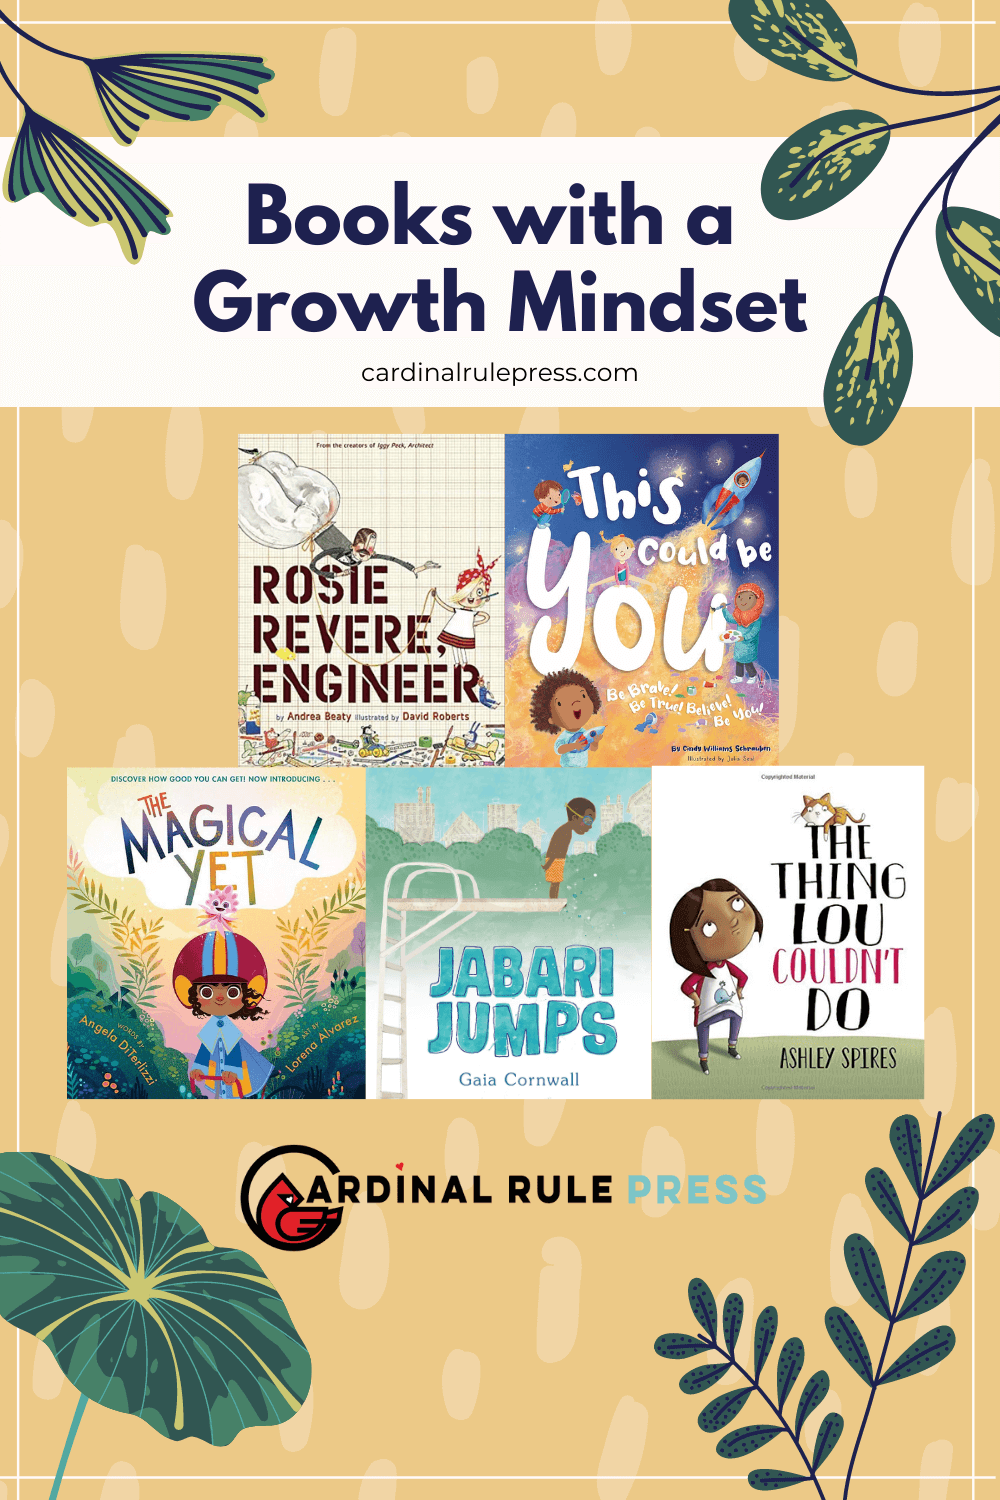 Book Report: Growth Mindset. A great way to encourage children to emphasize persistence, effort, and progress is to share books that embody a Growth Mindset. #GrowthMindset #BookReport #PictureBooks #ChildrensBooks